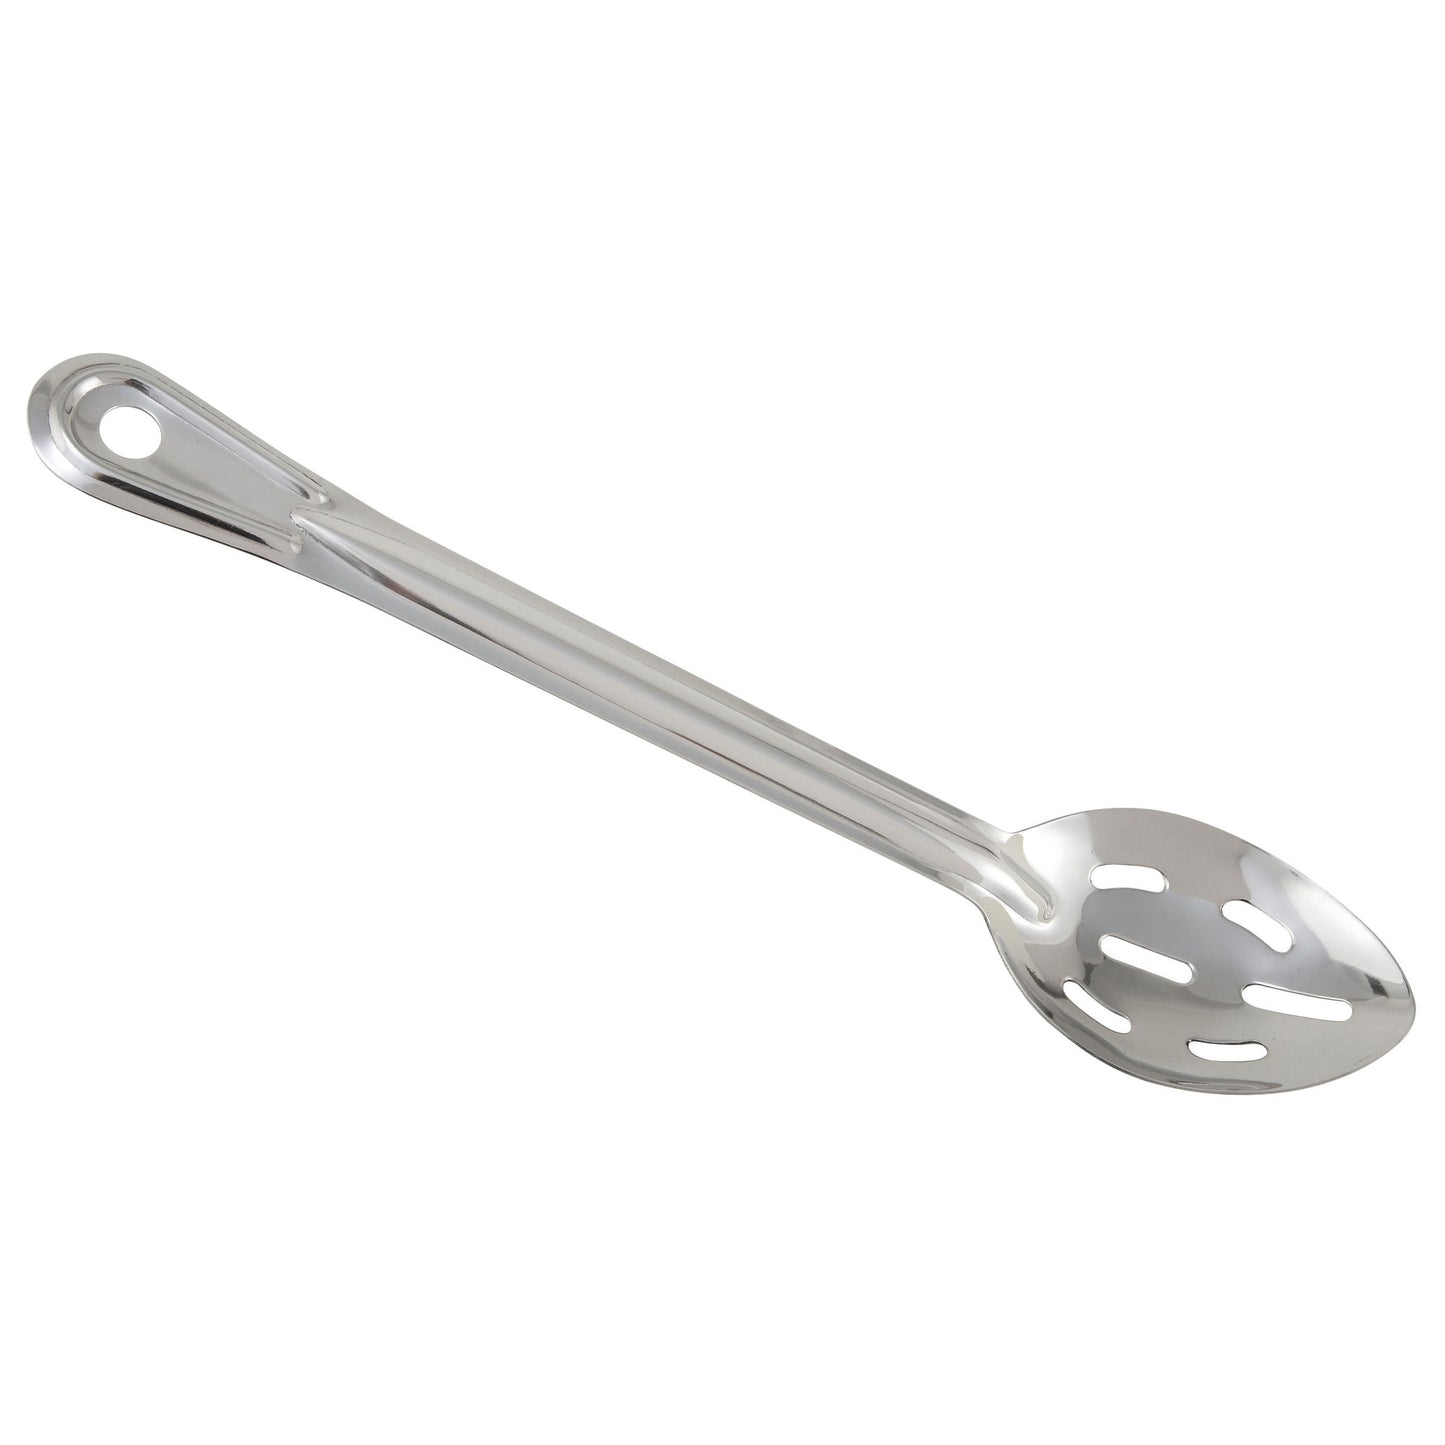 BSSN-15 - Winco Prime One-piece Stainless Steel Basting Spoon, NSF - Slotted, 15"